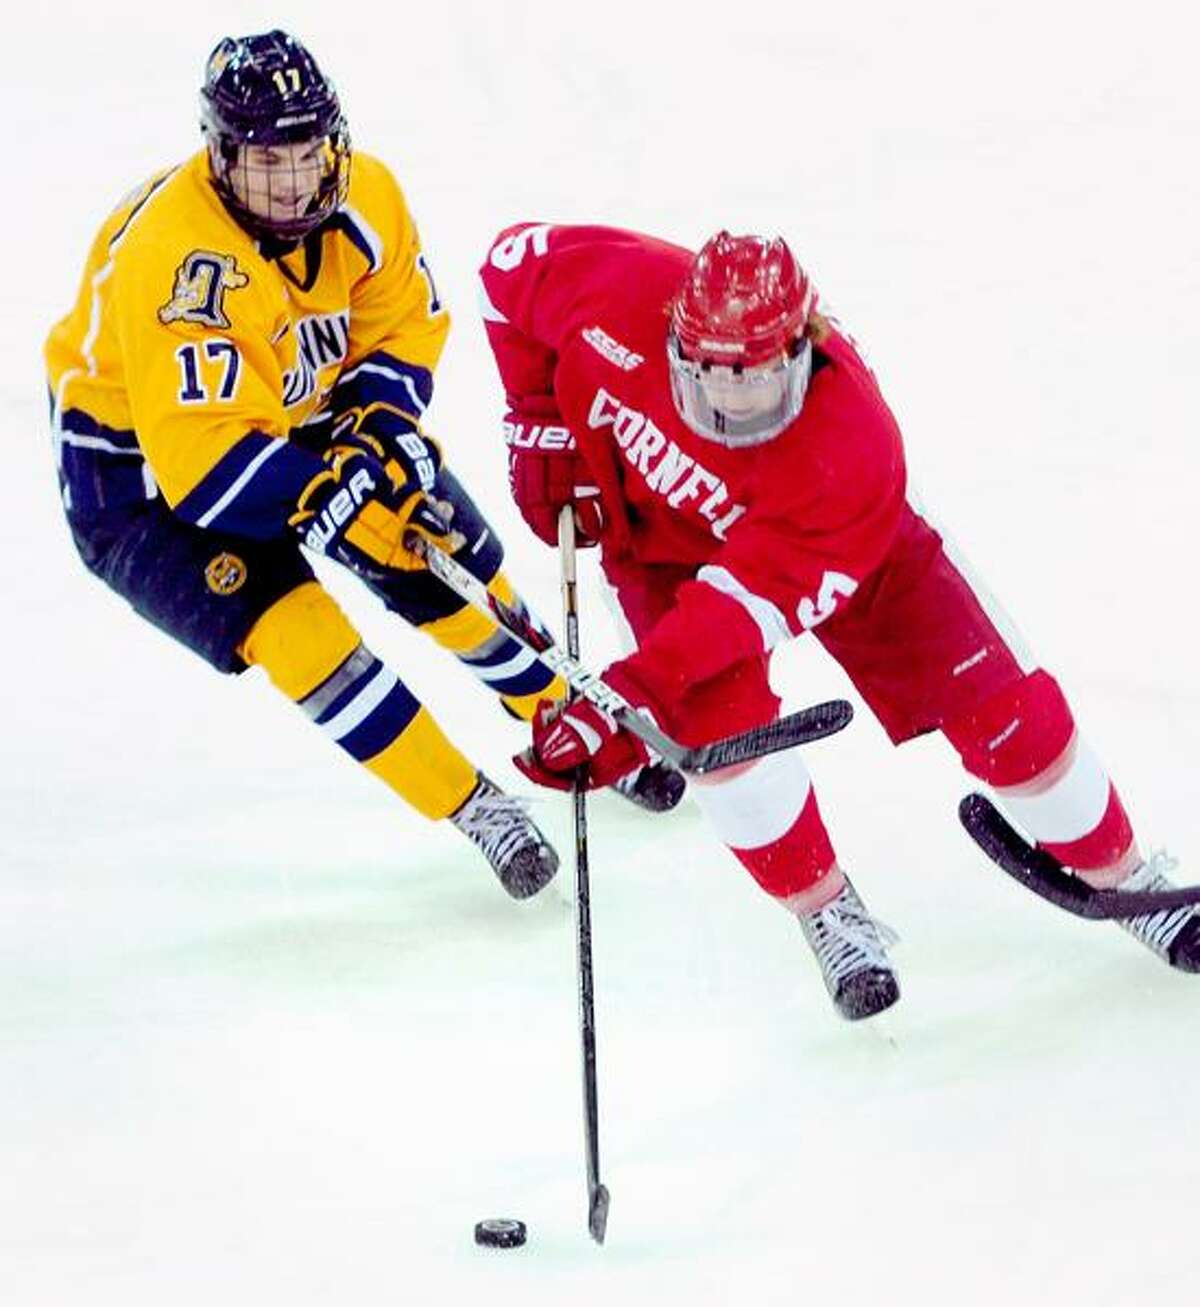 Jeremy Langlois (left) of Quinnipiac and Joakim Ryan (right) of Cornell fight for the puck in the second period during a ECAC quarterfinal contest on Friday. Arnold Gold/New Haven Register